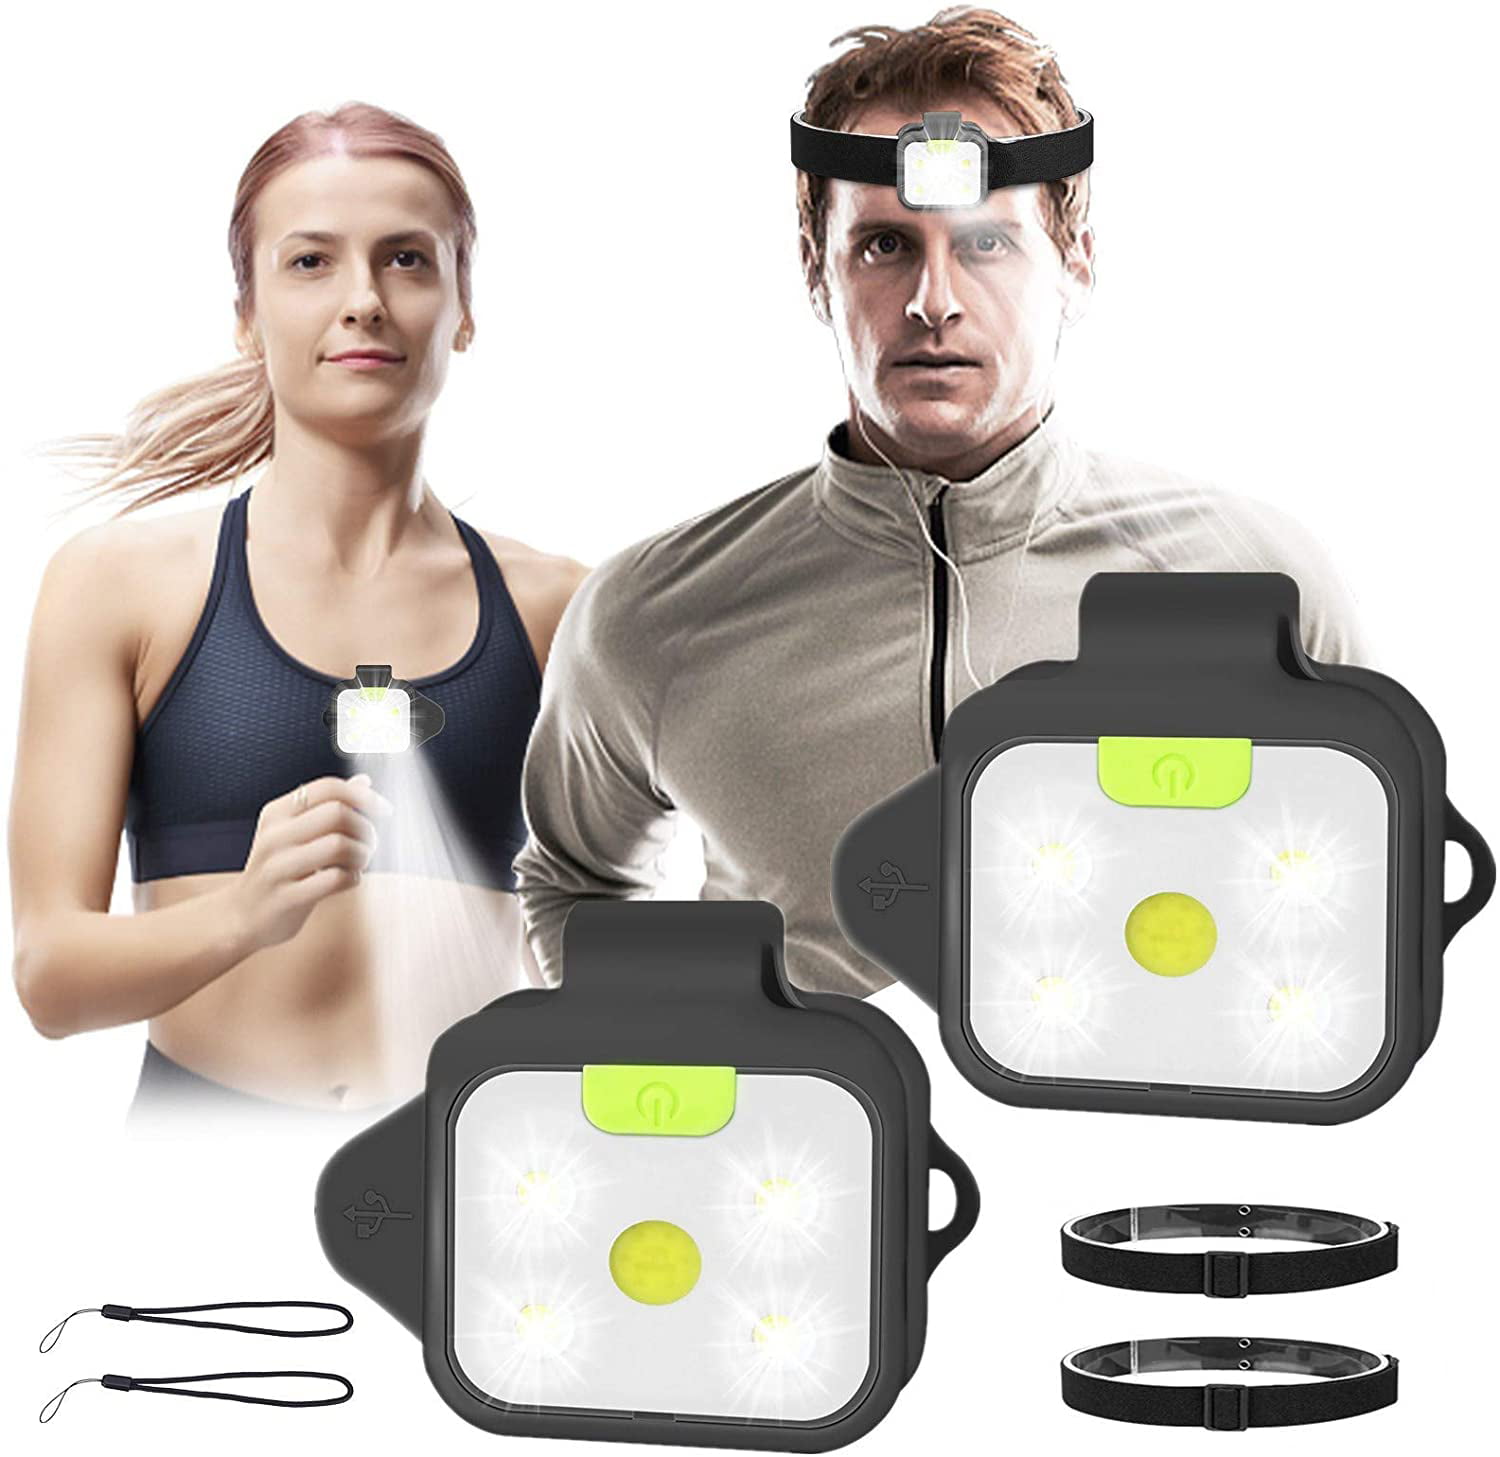 Silicone USB Charging Light Running Light Running Reflective Running Gear Clip On Running Light Jogging Outdoor Adventure Hiking LED Safety Light Safety Running Jogging Lights for Camping